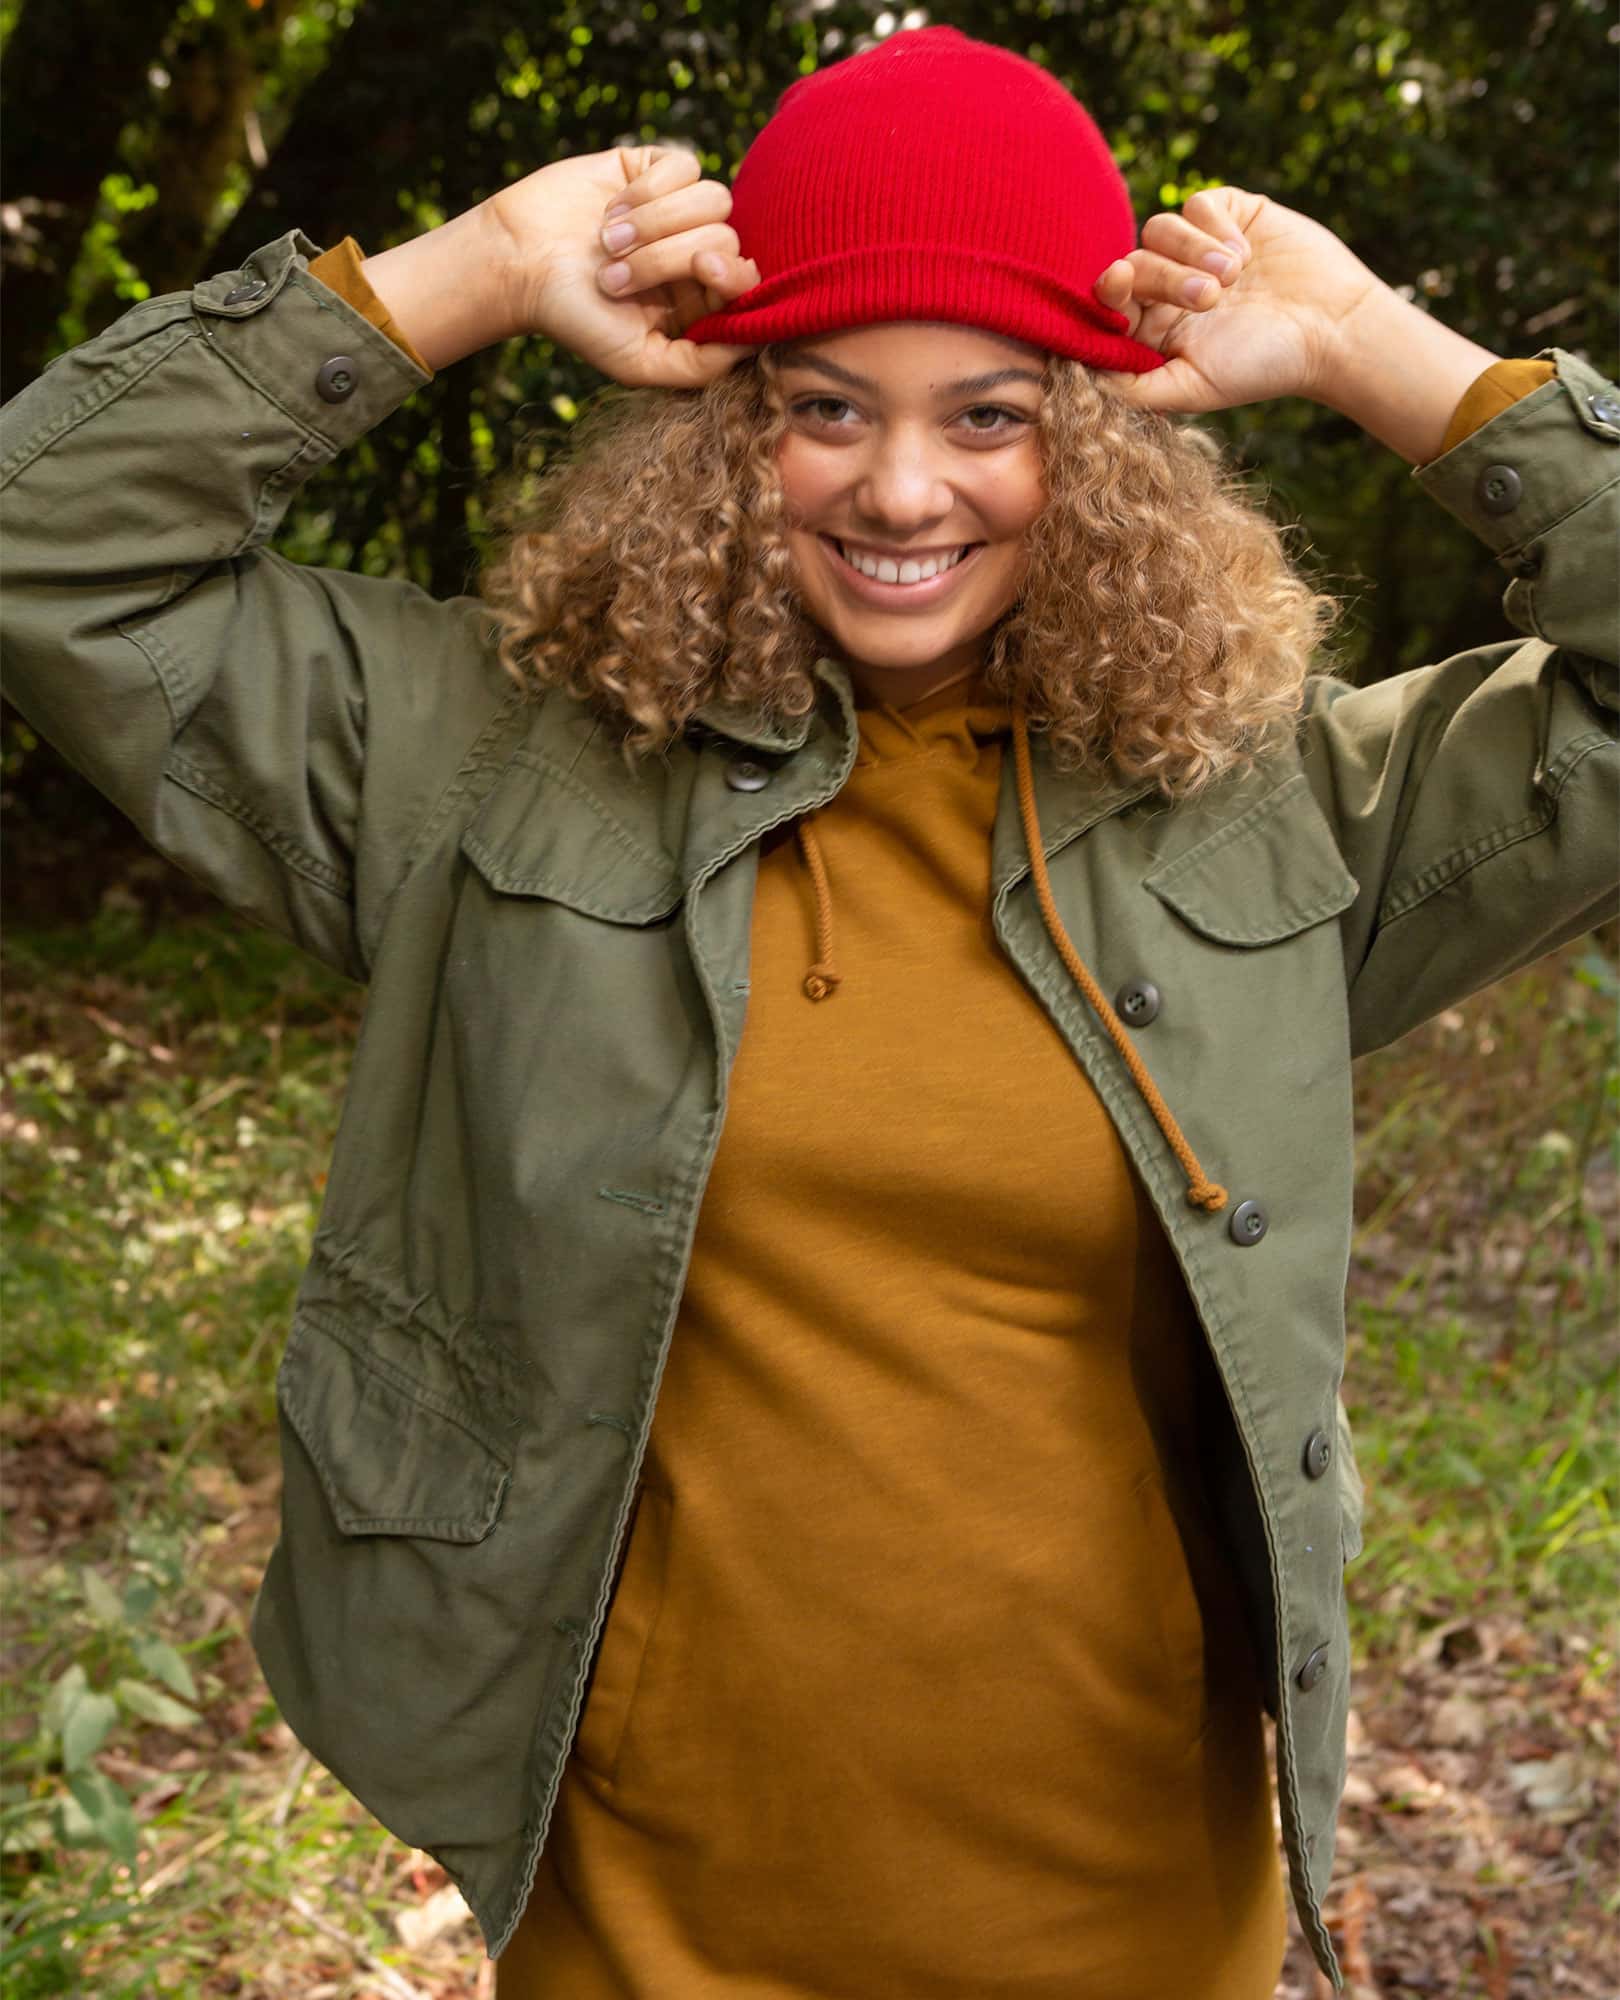 Women's Vintage Military Field Jacket by Toad&Co